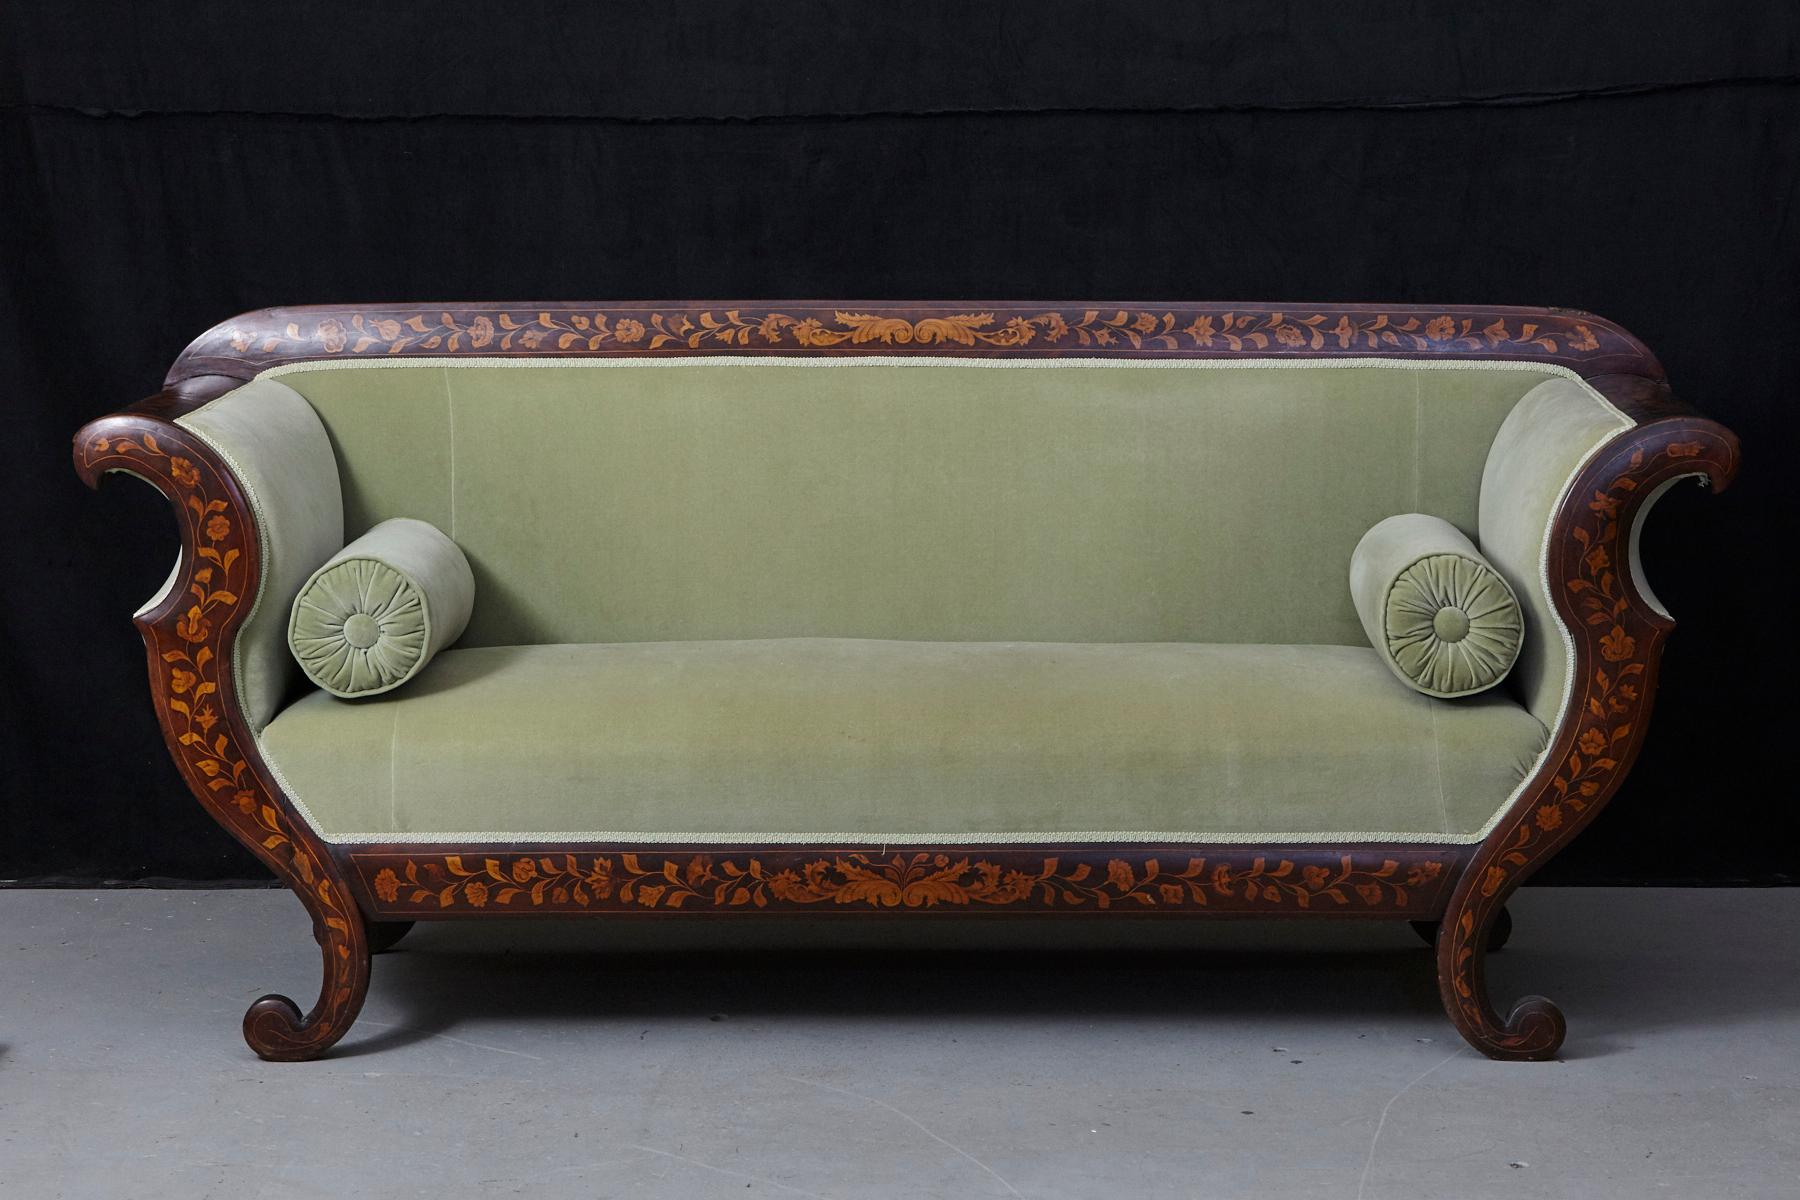 Lovely early 19th century Dutch Biedermeier carved fruitwood three seat sofa with intricate veneered marquetry in decorative floral patterns and lime green velvet upholstery.
The upholstery is still in good condition and seating is firm, a few